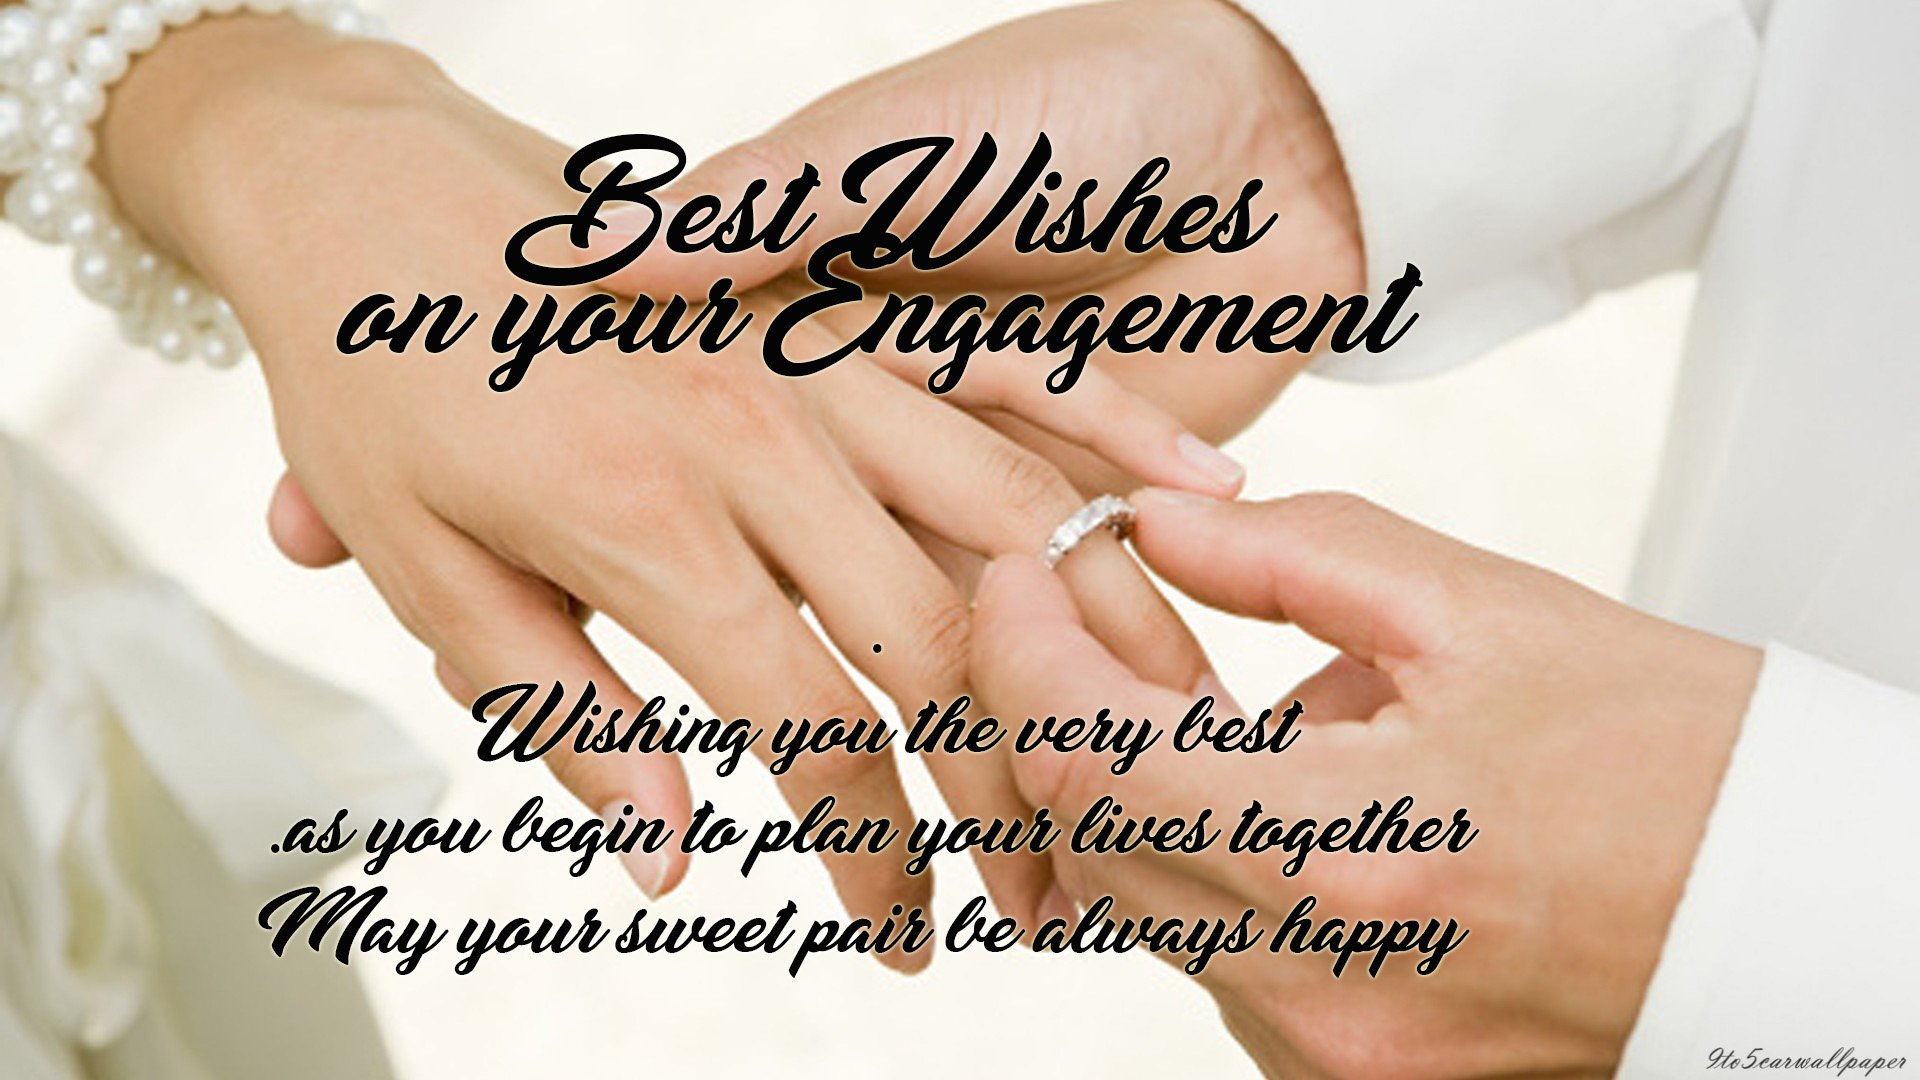 Engagement Quotes - Homecare24